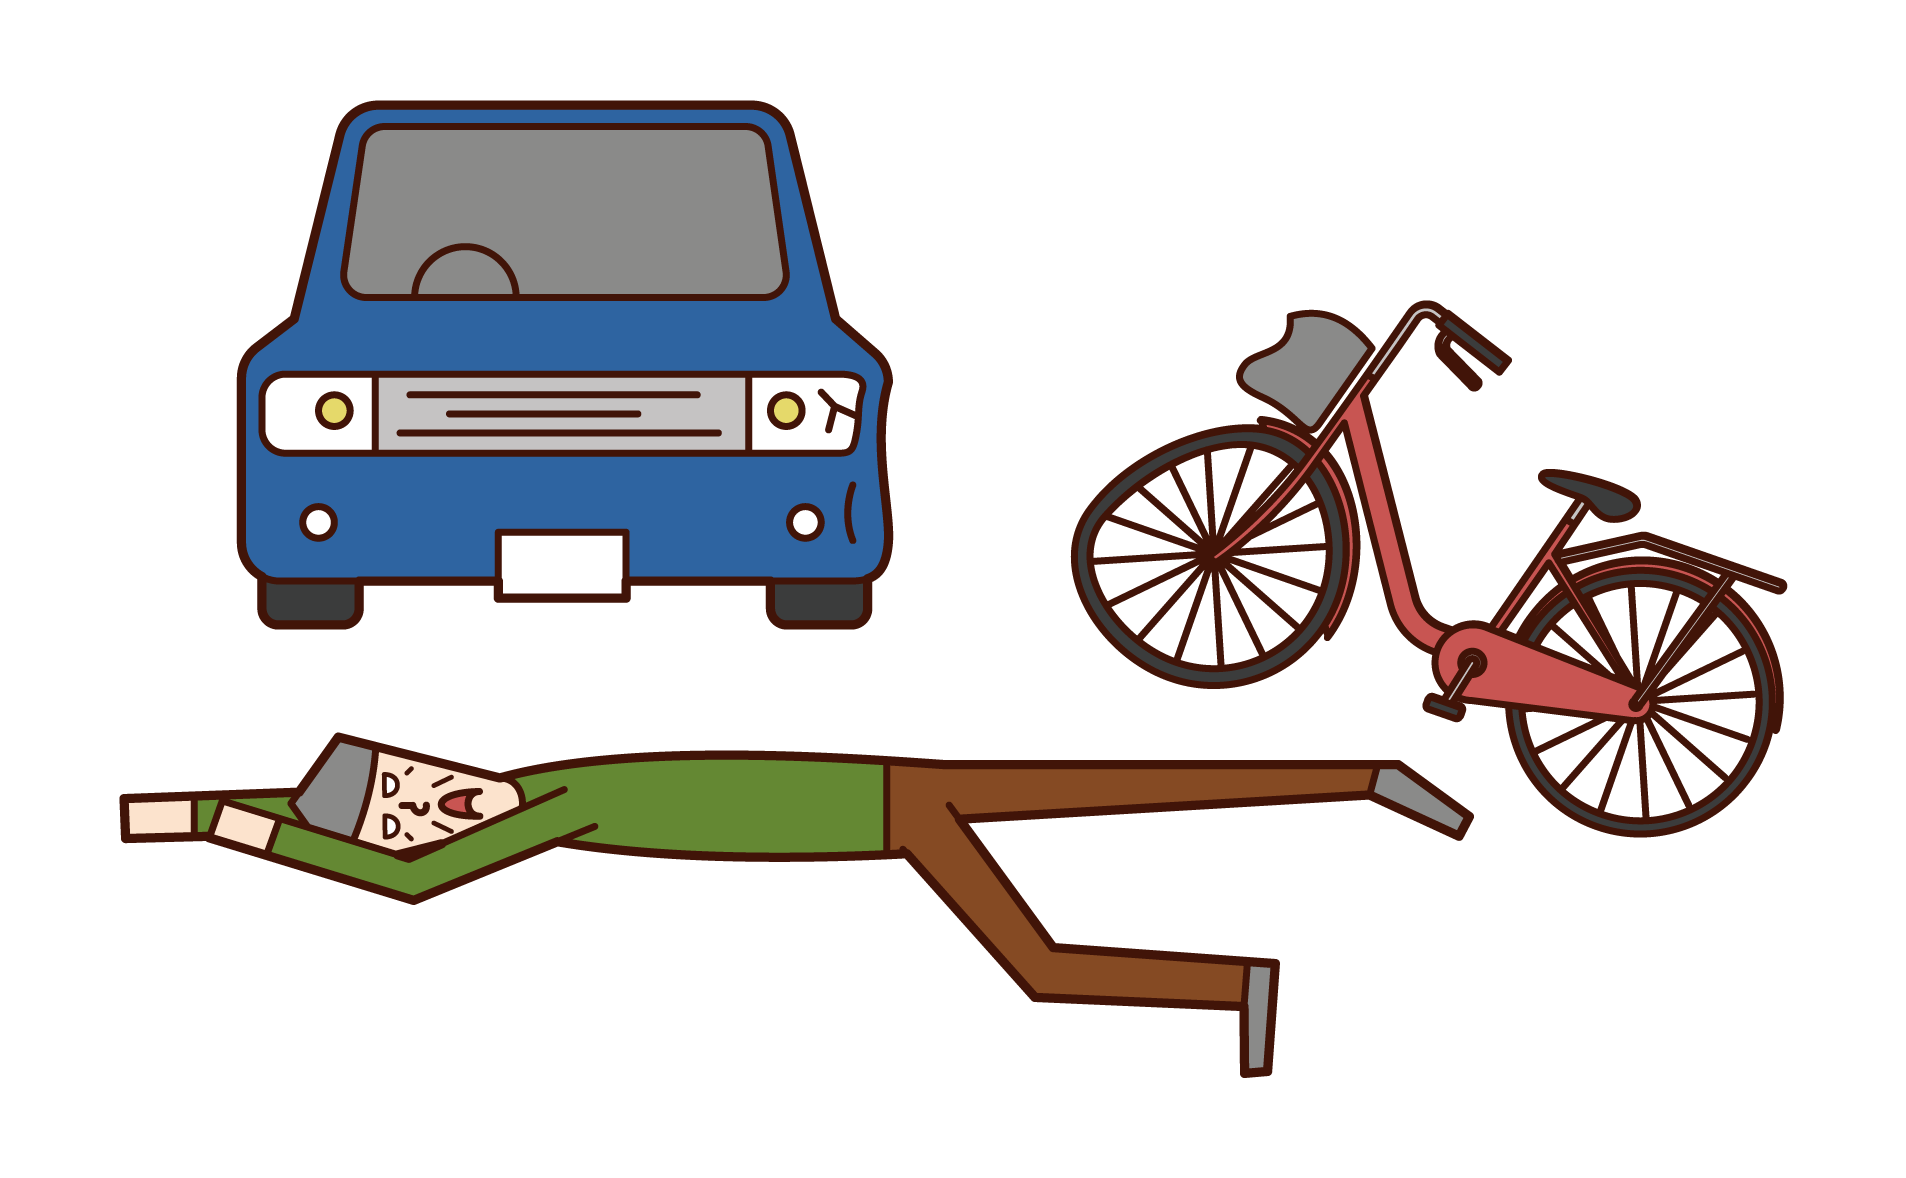 Illustration of a person (old man) who is collapsed in a traffic accident